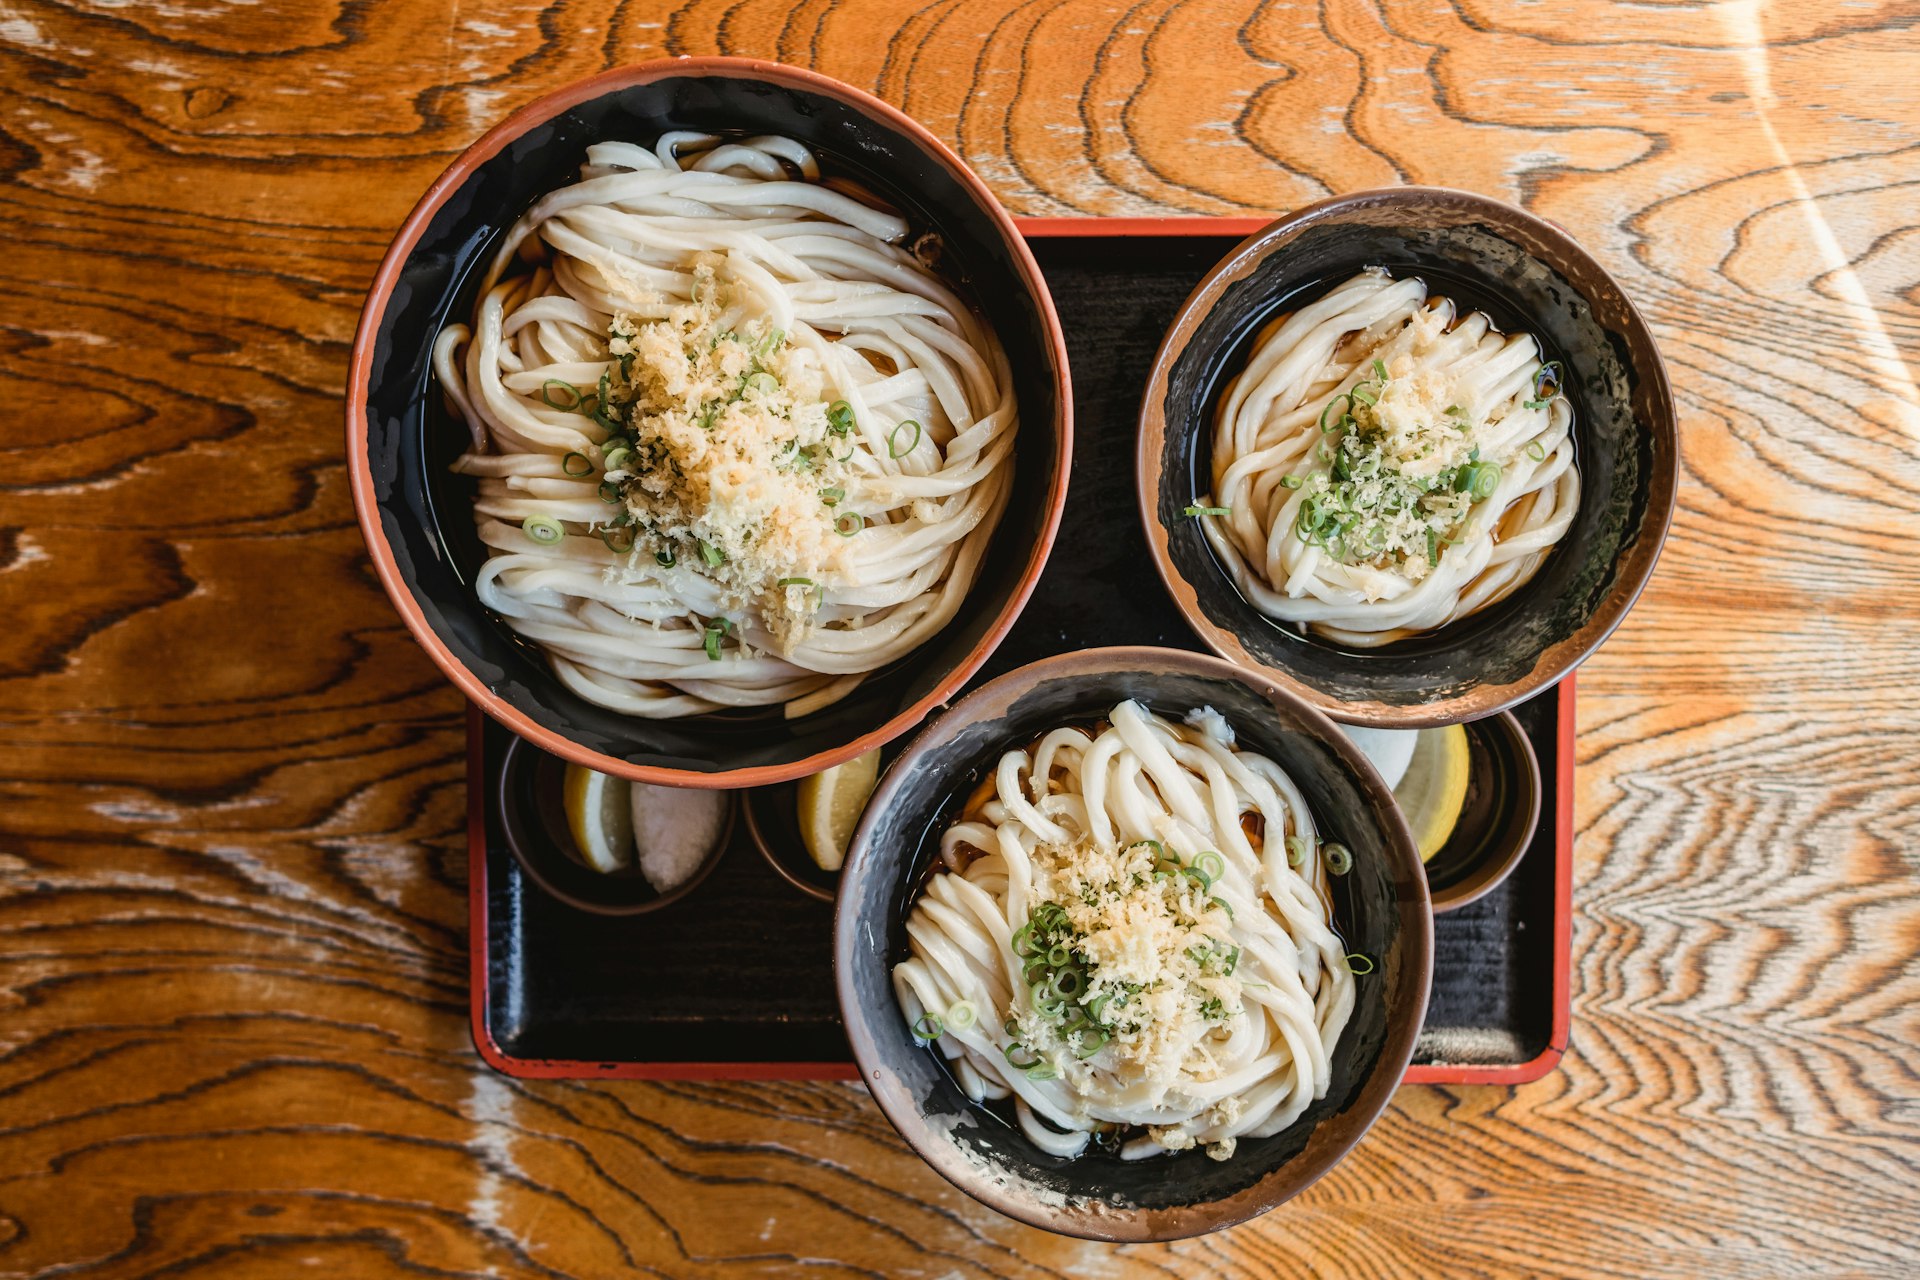 Three bowls of udon in different sizes: dai (large), chuu (medium), and sho (small)